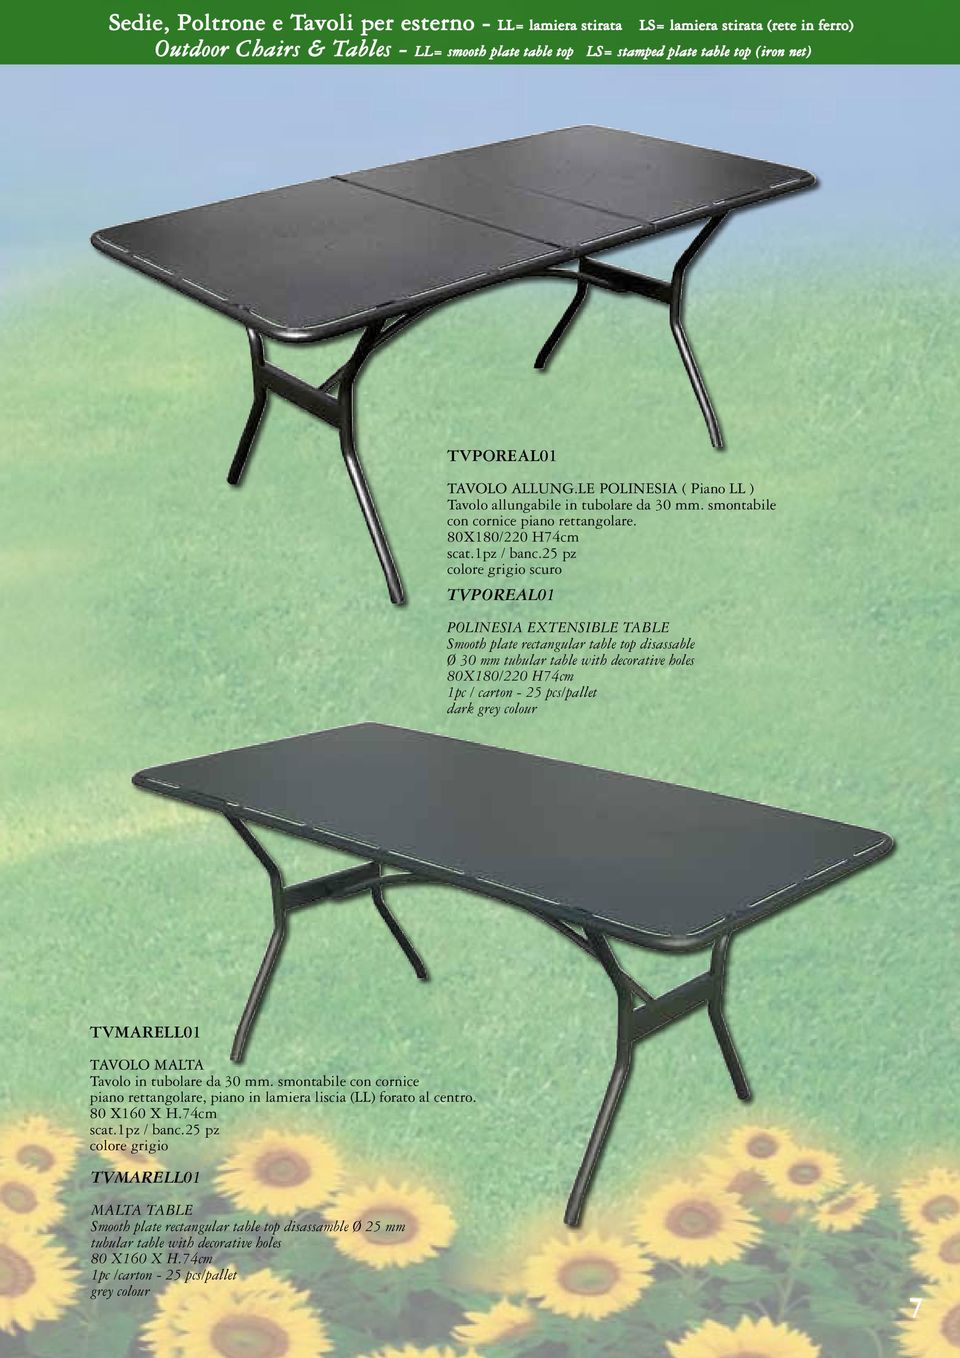 25 pz TVPOREAL01 POLINESIA EXTENSIBLE TABLE Smooth plate rectangular table top disassable Ø 30 mm tubular table with decorative holes 80X180/220 H74cm 1pc / carton - 25 pcs/pallet TVMARELL01 TAVOLO